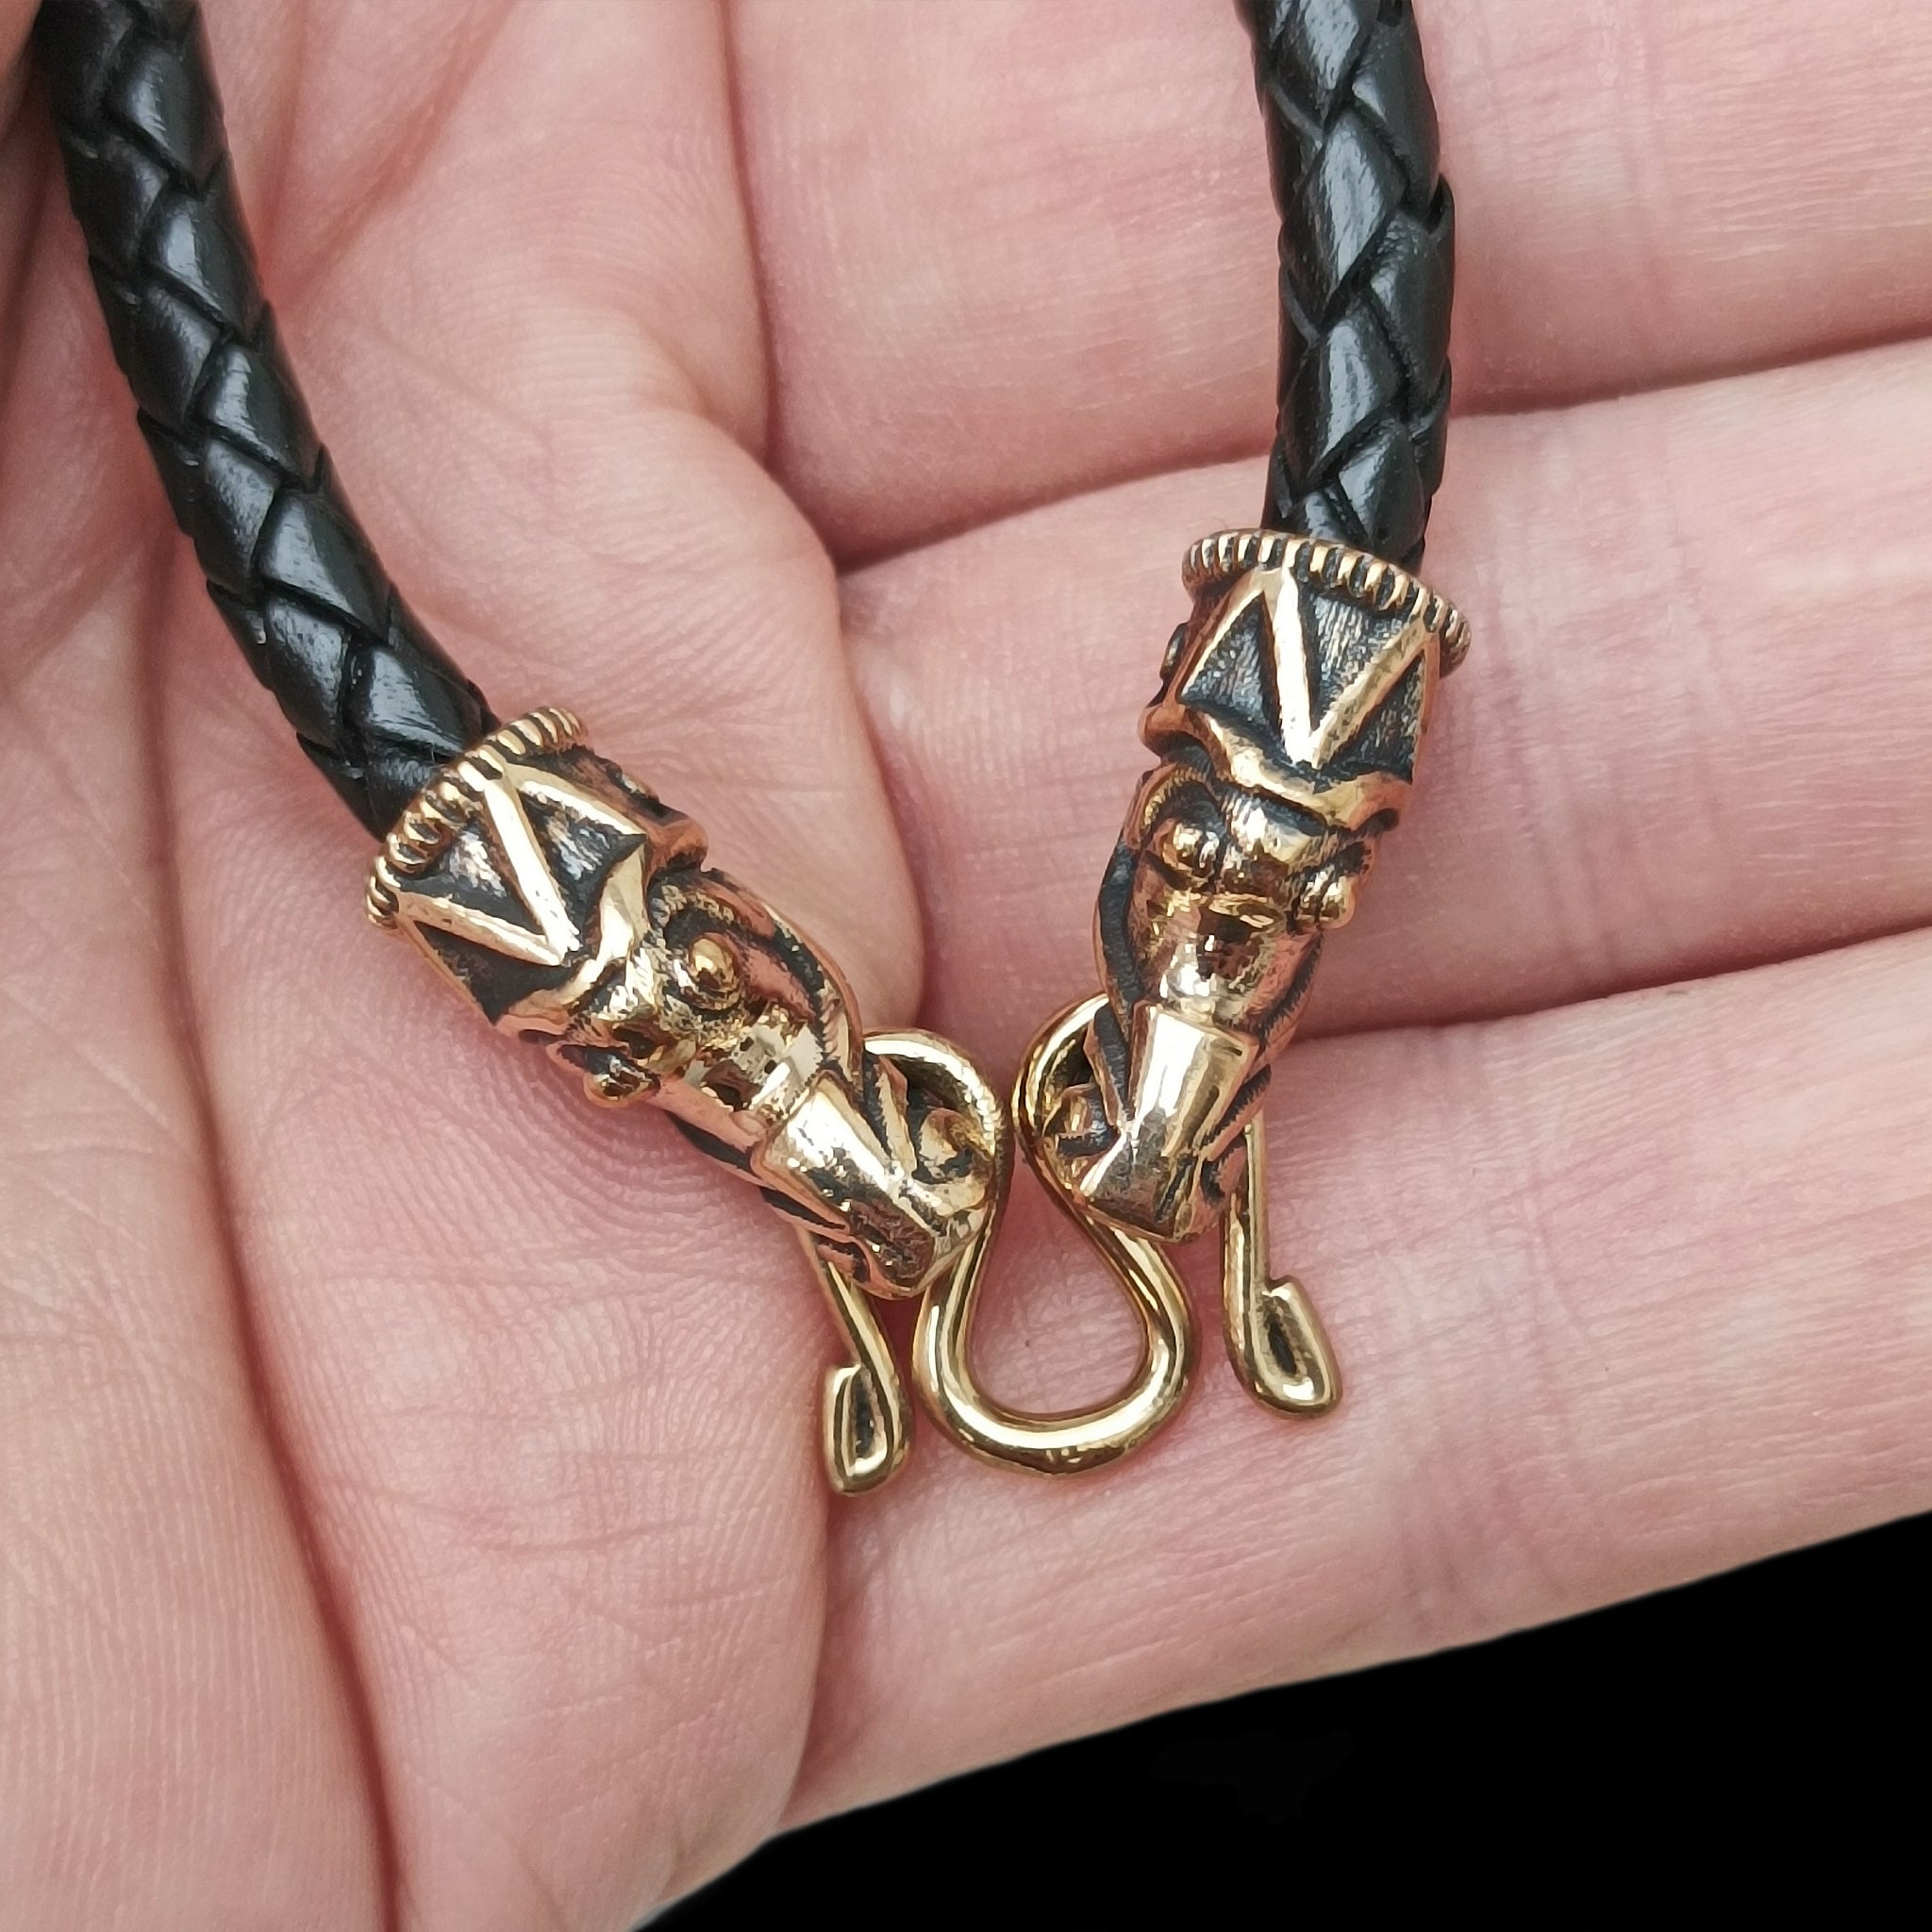 Braided leather necklace for pendant